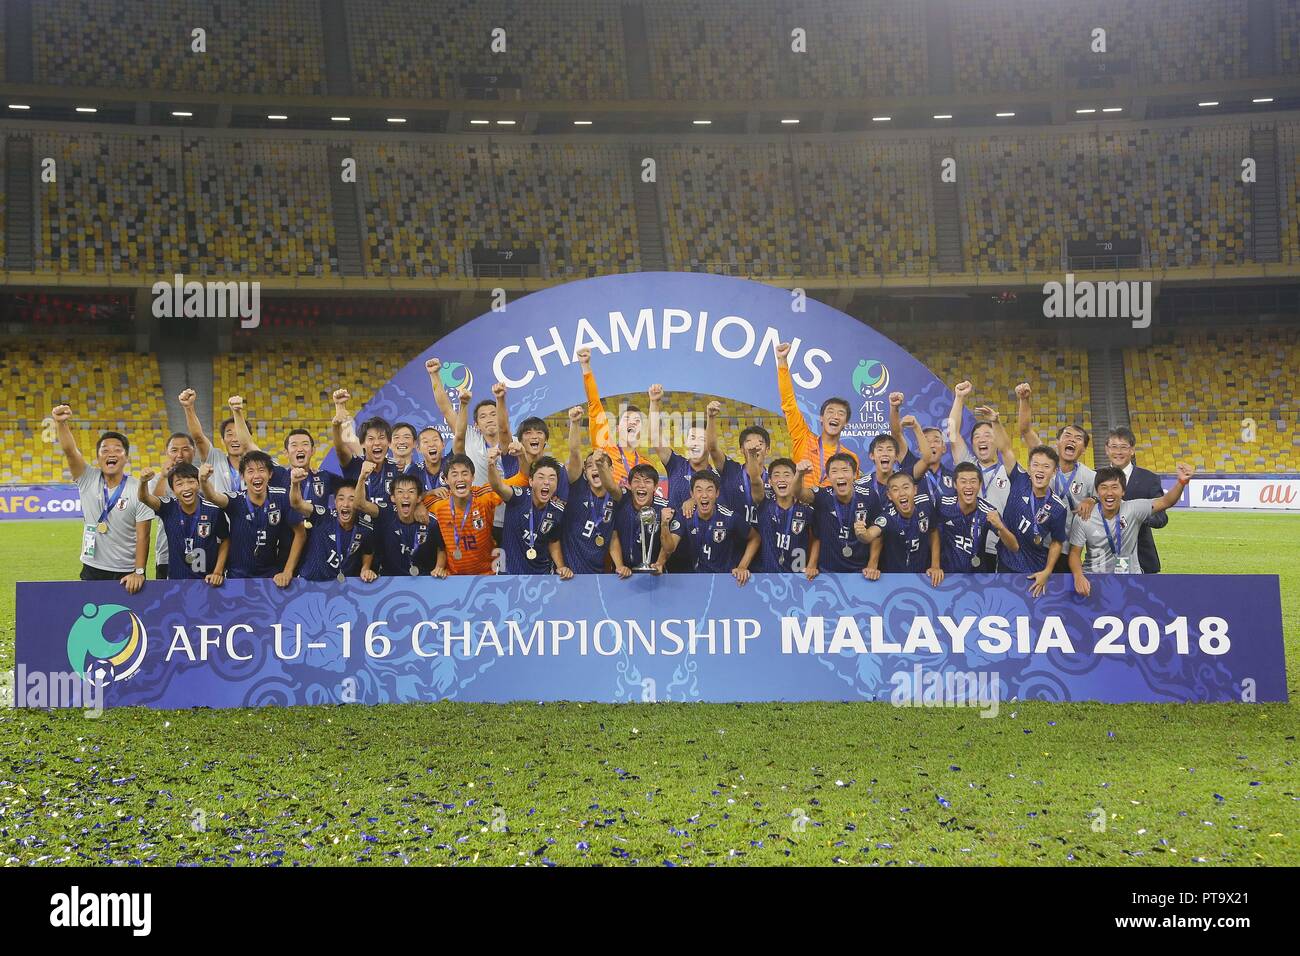 Japan Players Celebrate With The Trophy After Winning The Afc U 16